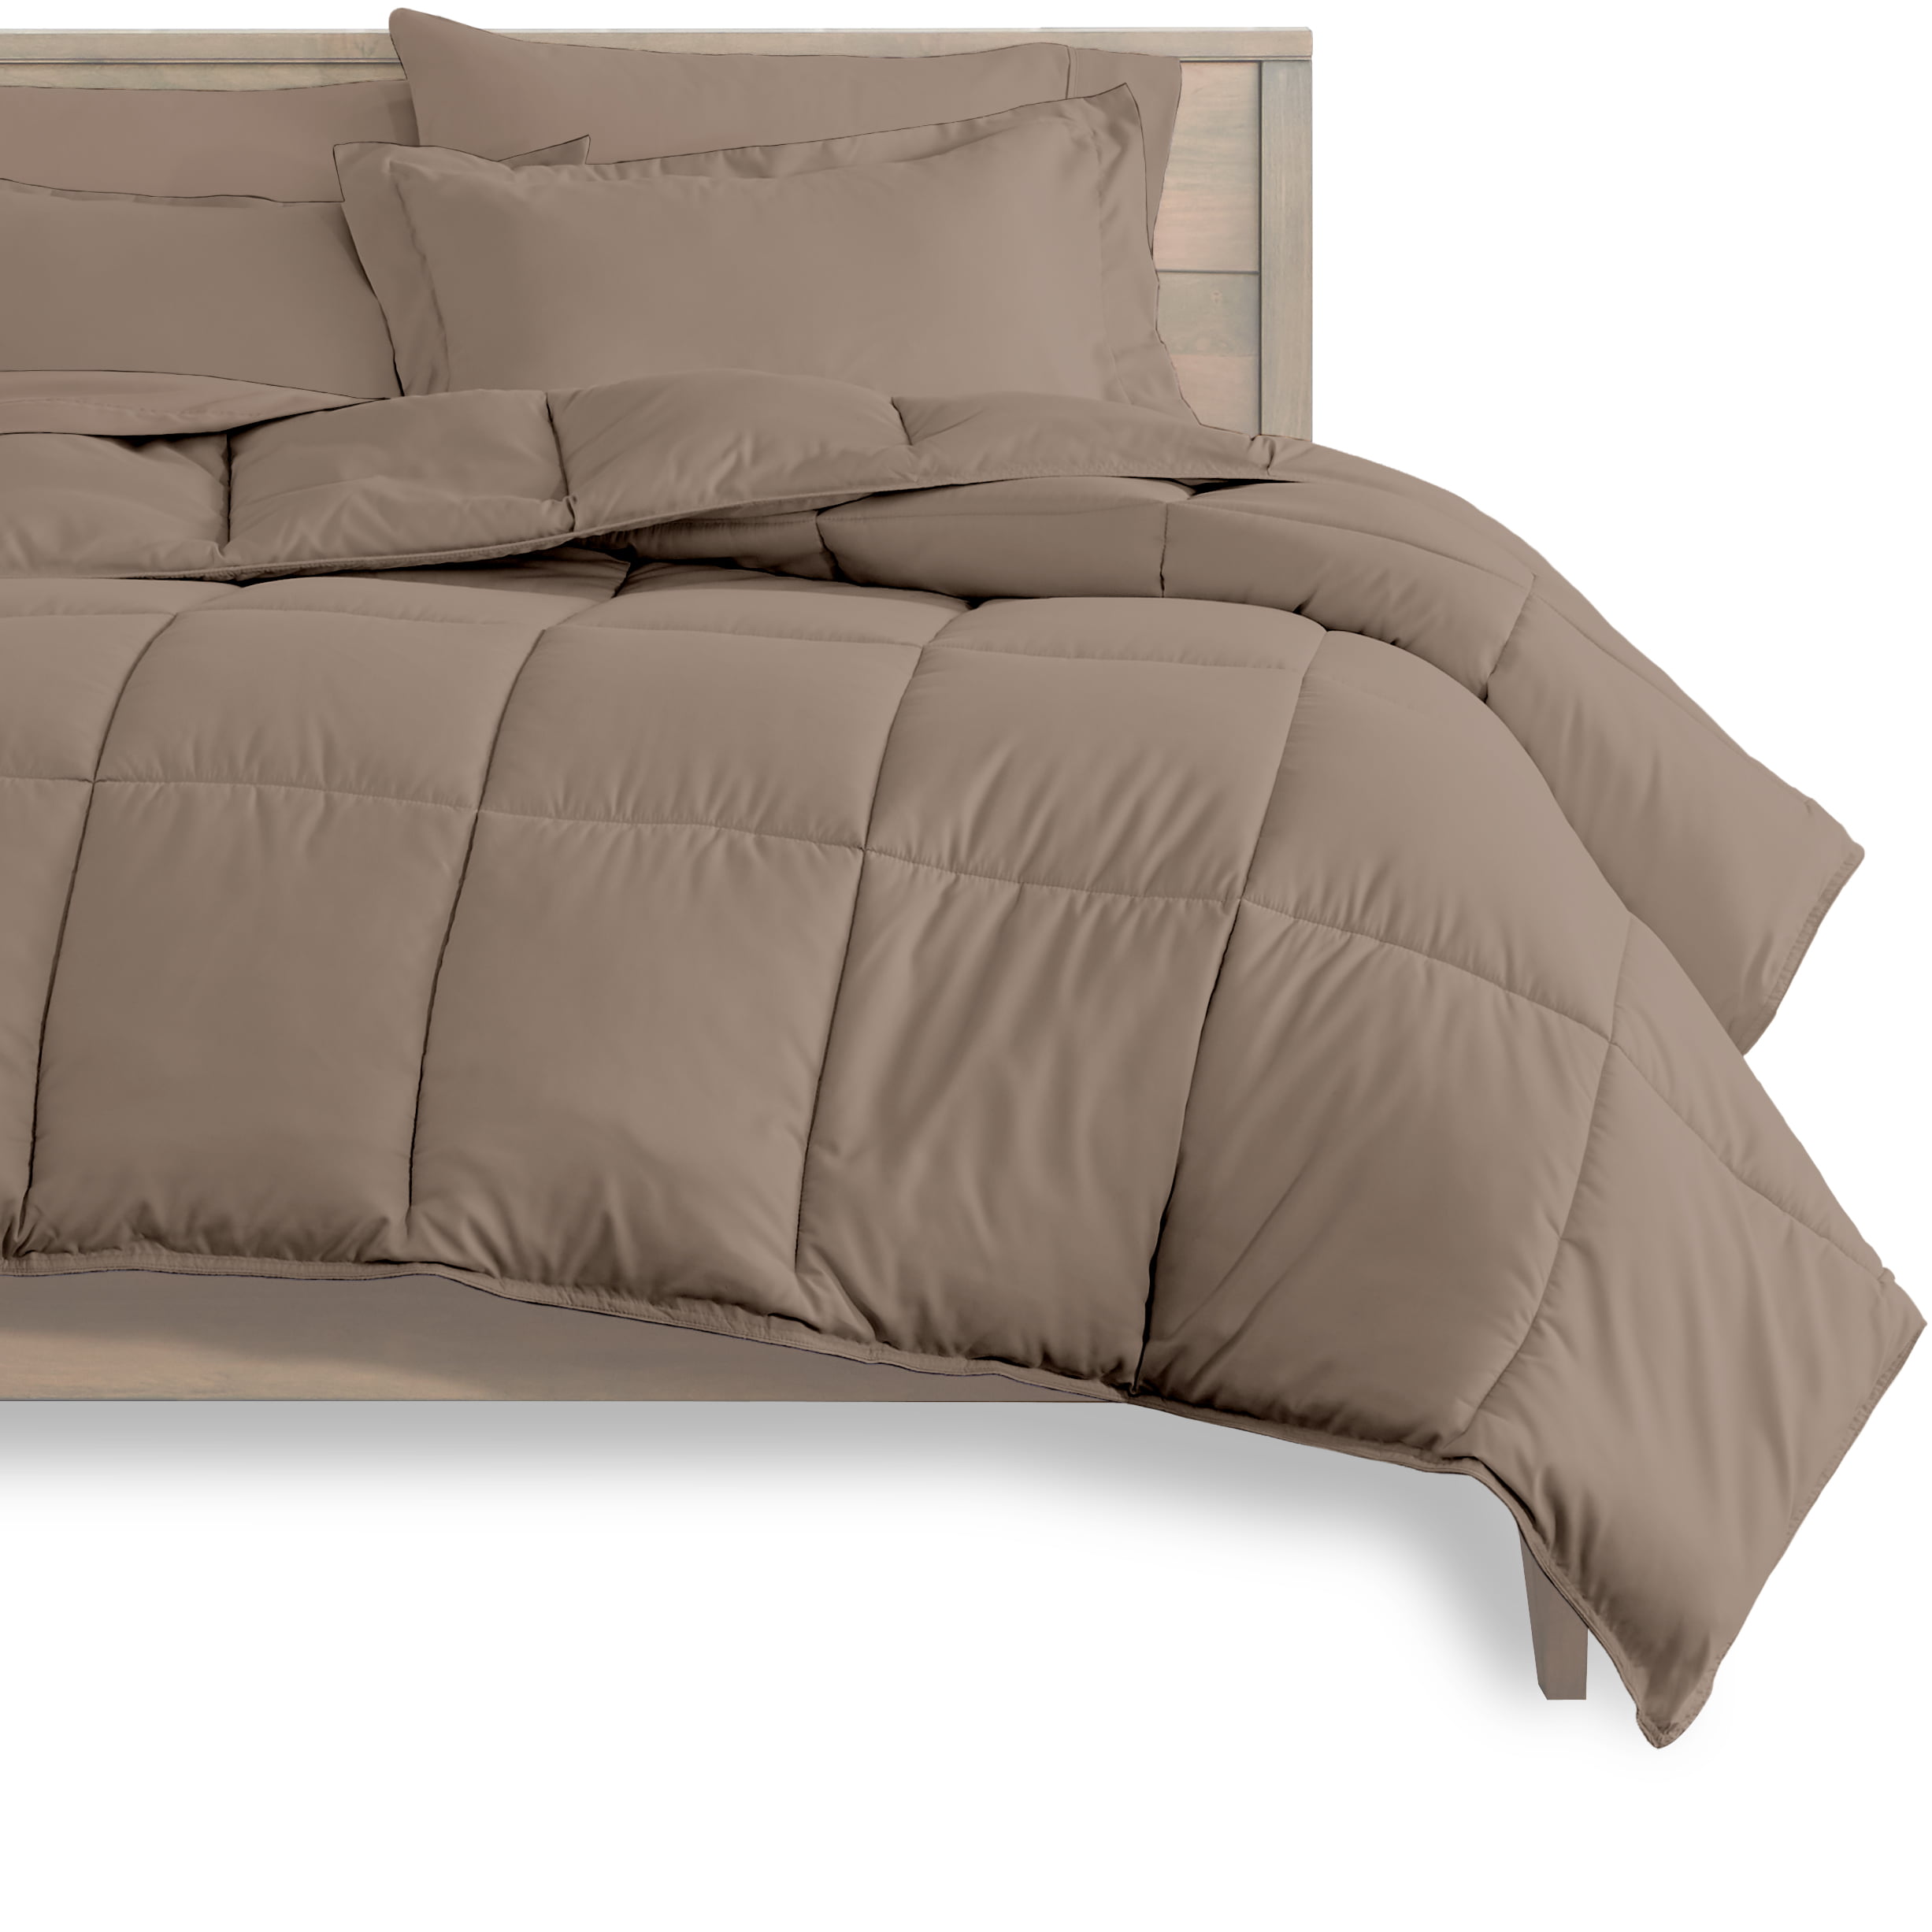 Bare Home Bedding Bundle 4 Piece Microfiber Sheet Set with 2 Pillowcases Twin XL, Taupe 